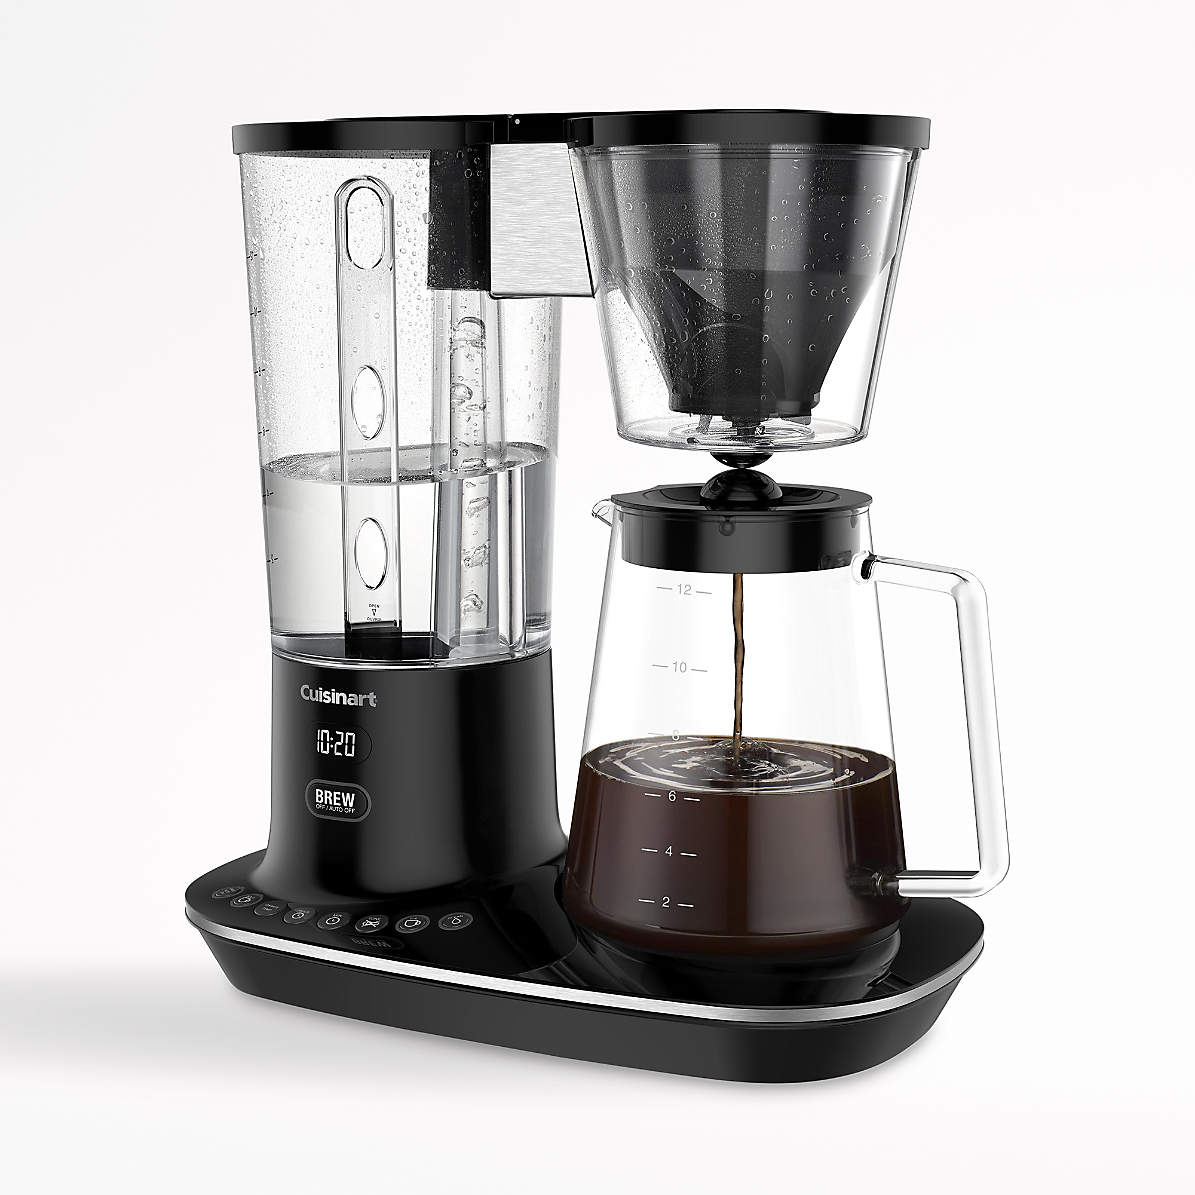 https://cb.scene7.com/is/image/Crate/Cuis12cpPrgmCffMkrAVSSS20_VND/$web_pdp_main_carousel_zoom_med$/200310172106/cuisinart-12-cup-programmable-coffee-maker.jpg